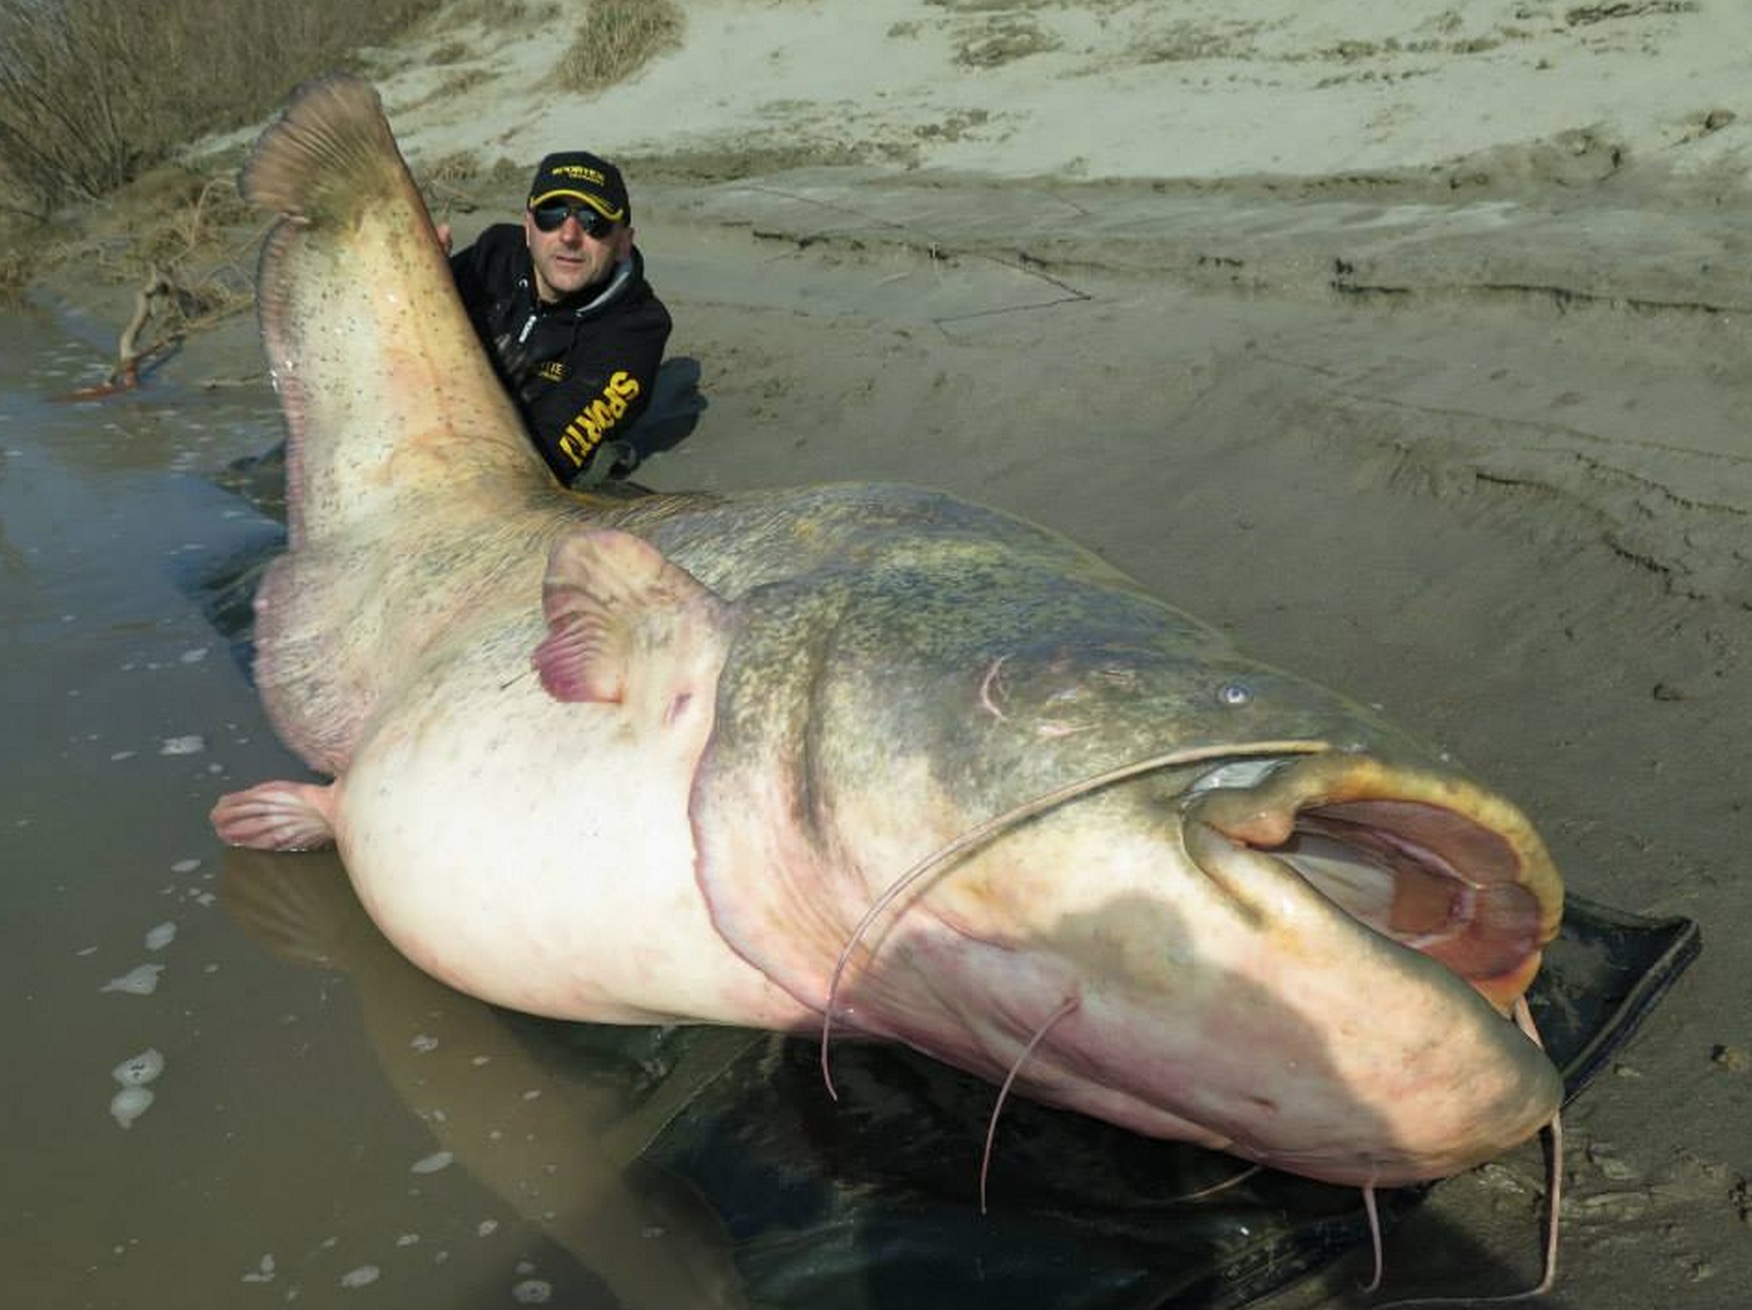 Italian fisherman catches monstrous 280-pound catfish | For The Win